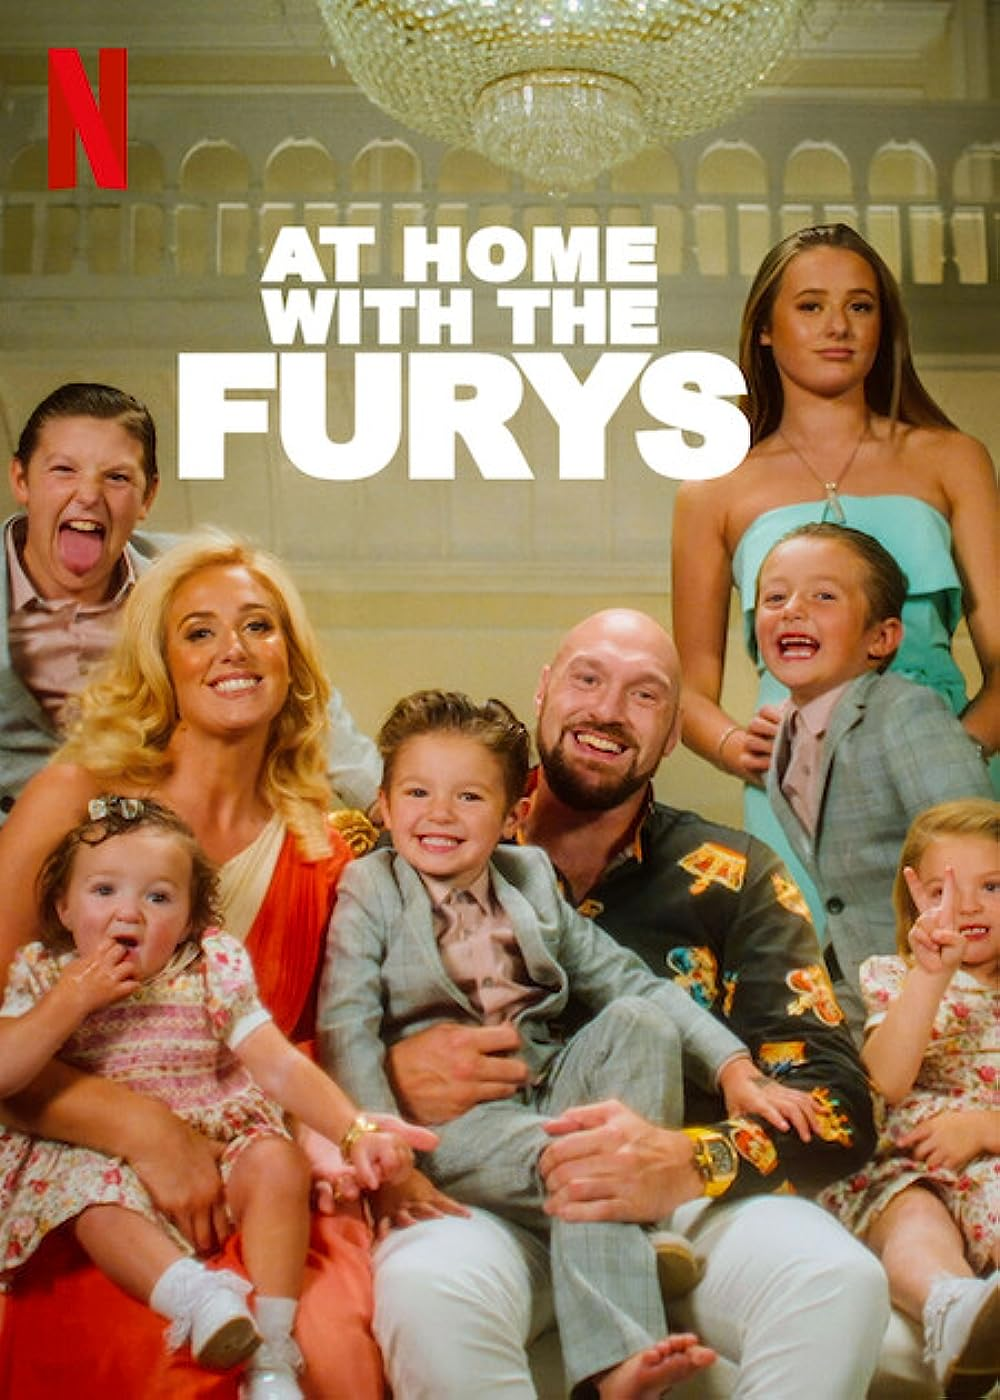 At Home With The Furys Documentary Review